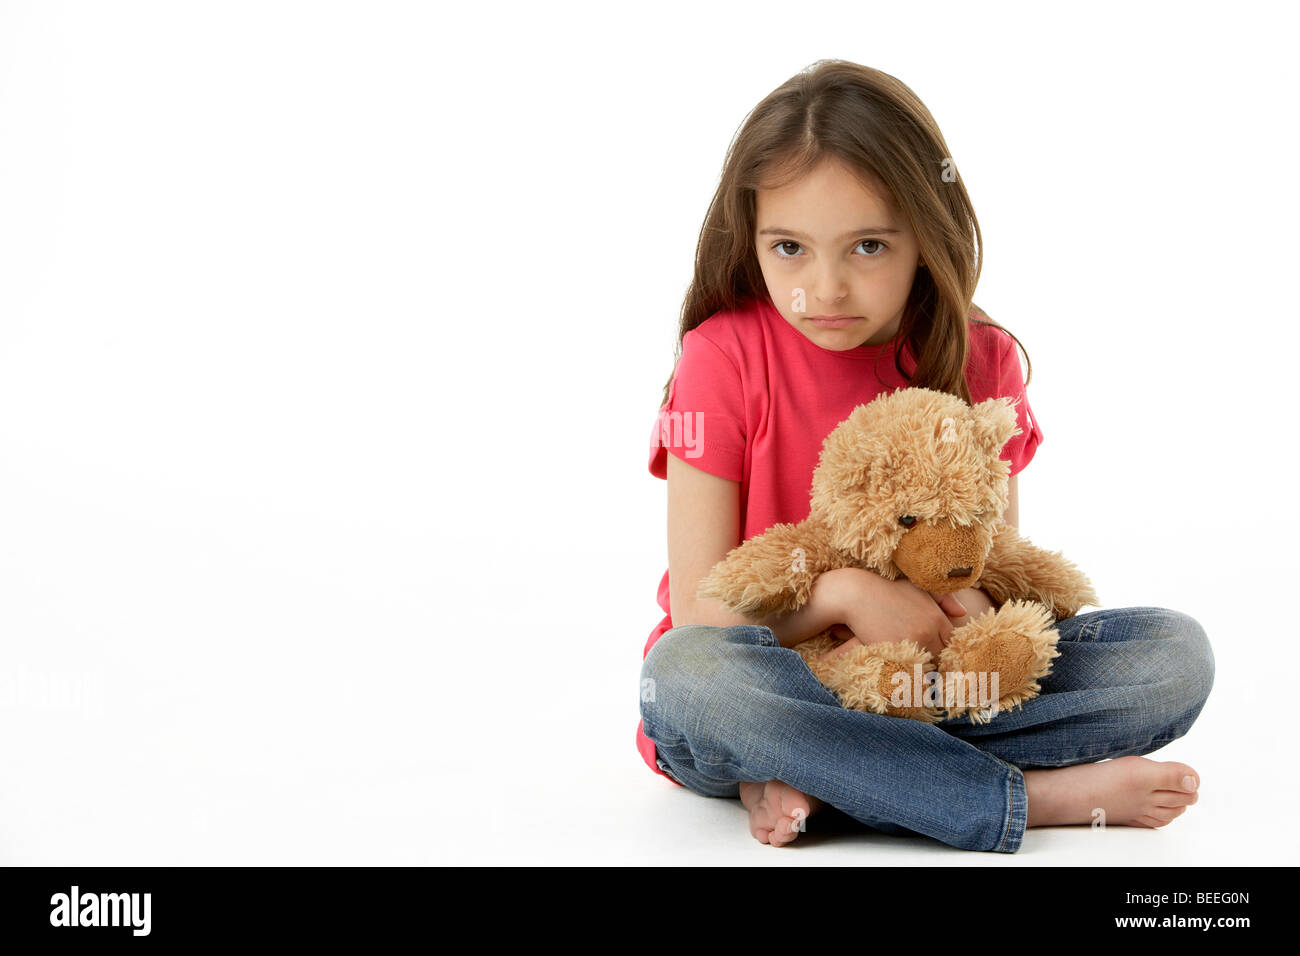 Studio Portrait Of Smiling Girl with Teddy Bear Banque D'Images